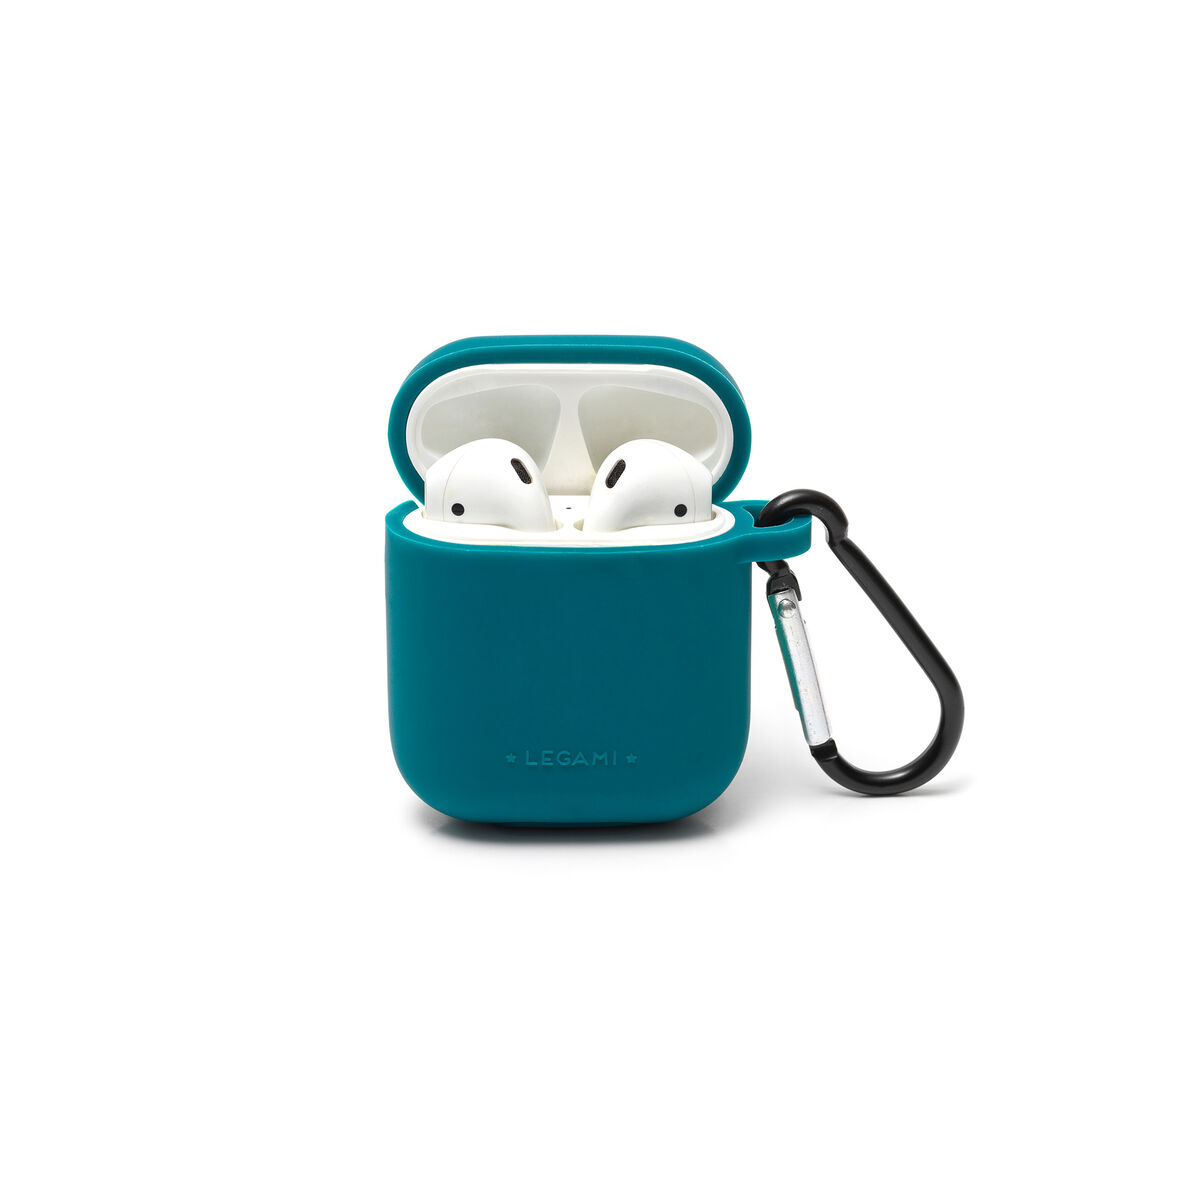 Air'N Go - Case And Cord Set For Airpods 1/2 - Petrol Blue